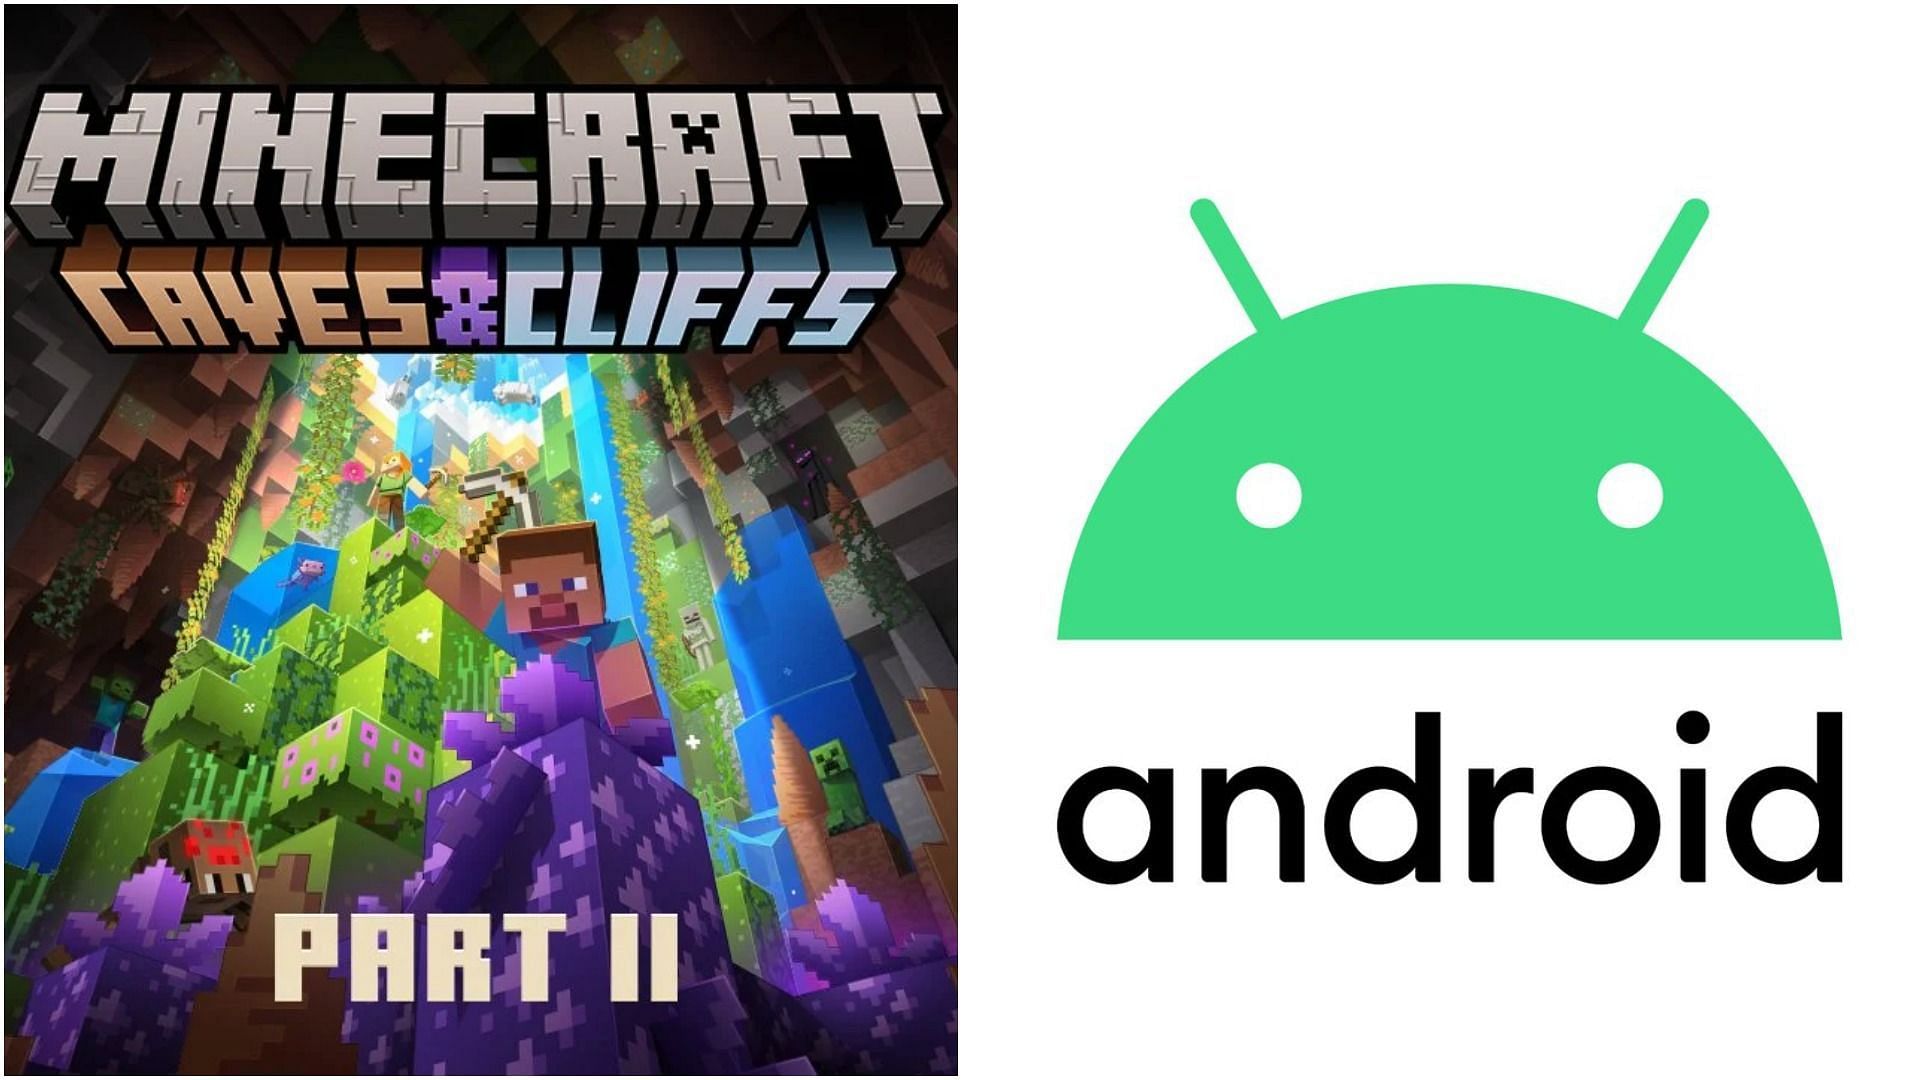 Minecraft 1.18 update for Android (Image via Sportskeeda) Minecraft on Google Play Store (Image via Sportskeeda)